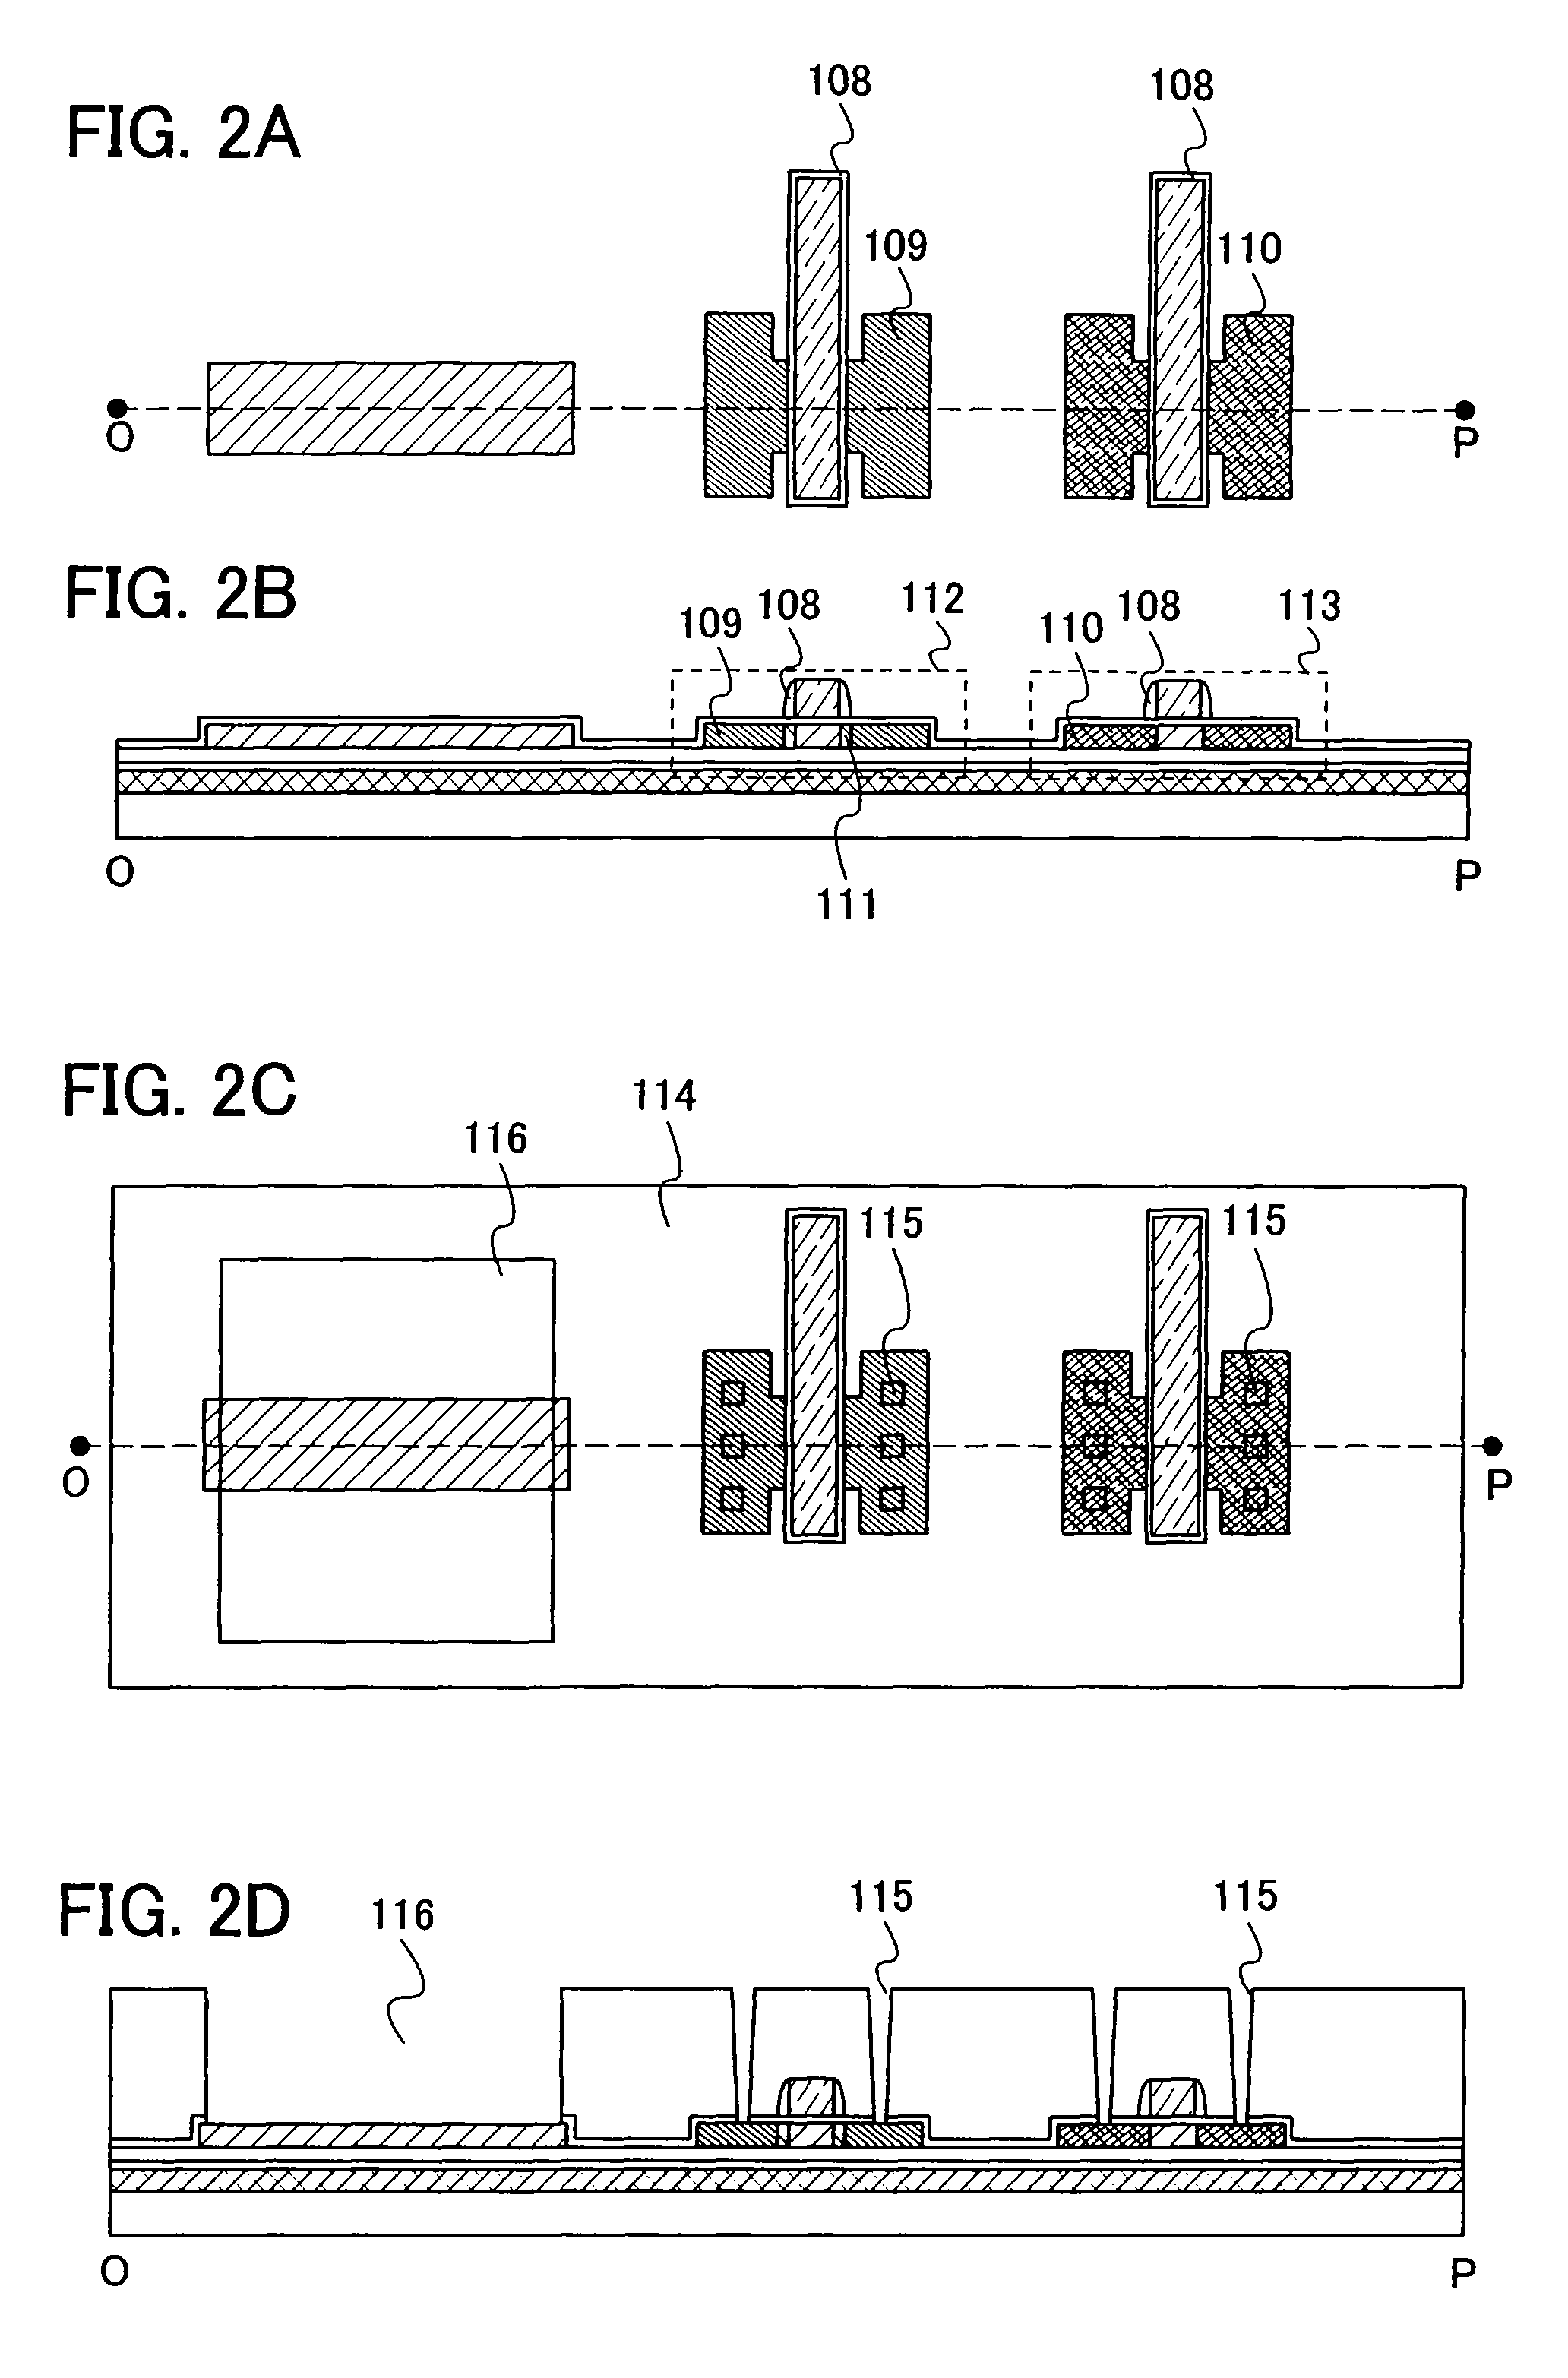 Method for manufacturing a micro-electro-mechanical device with a folded substrate